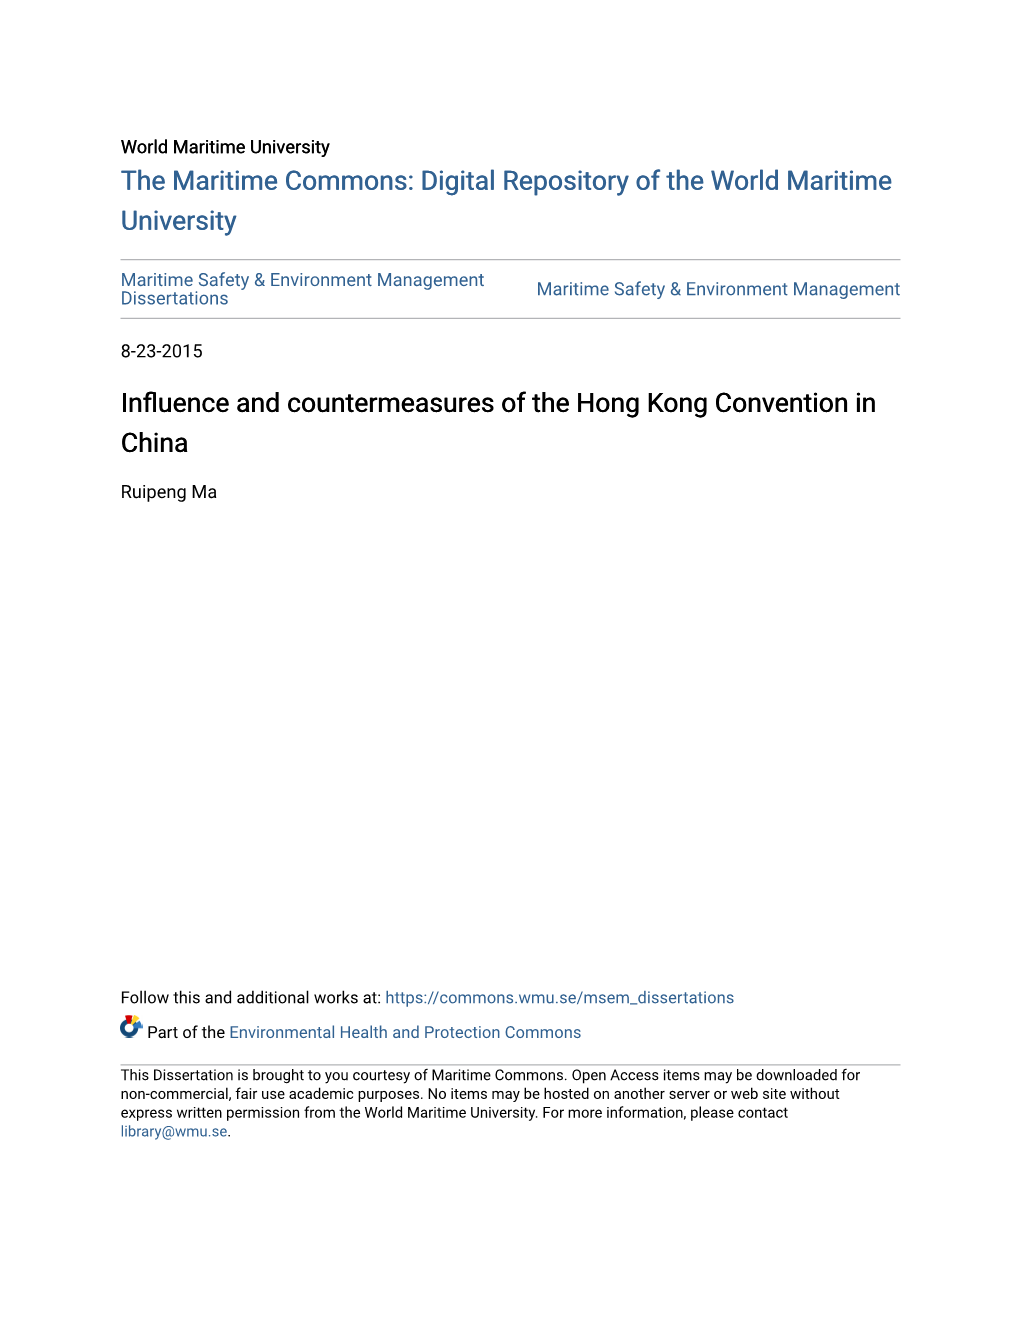 Influence and Countermeasures of the Hong Kong Convention in China